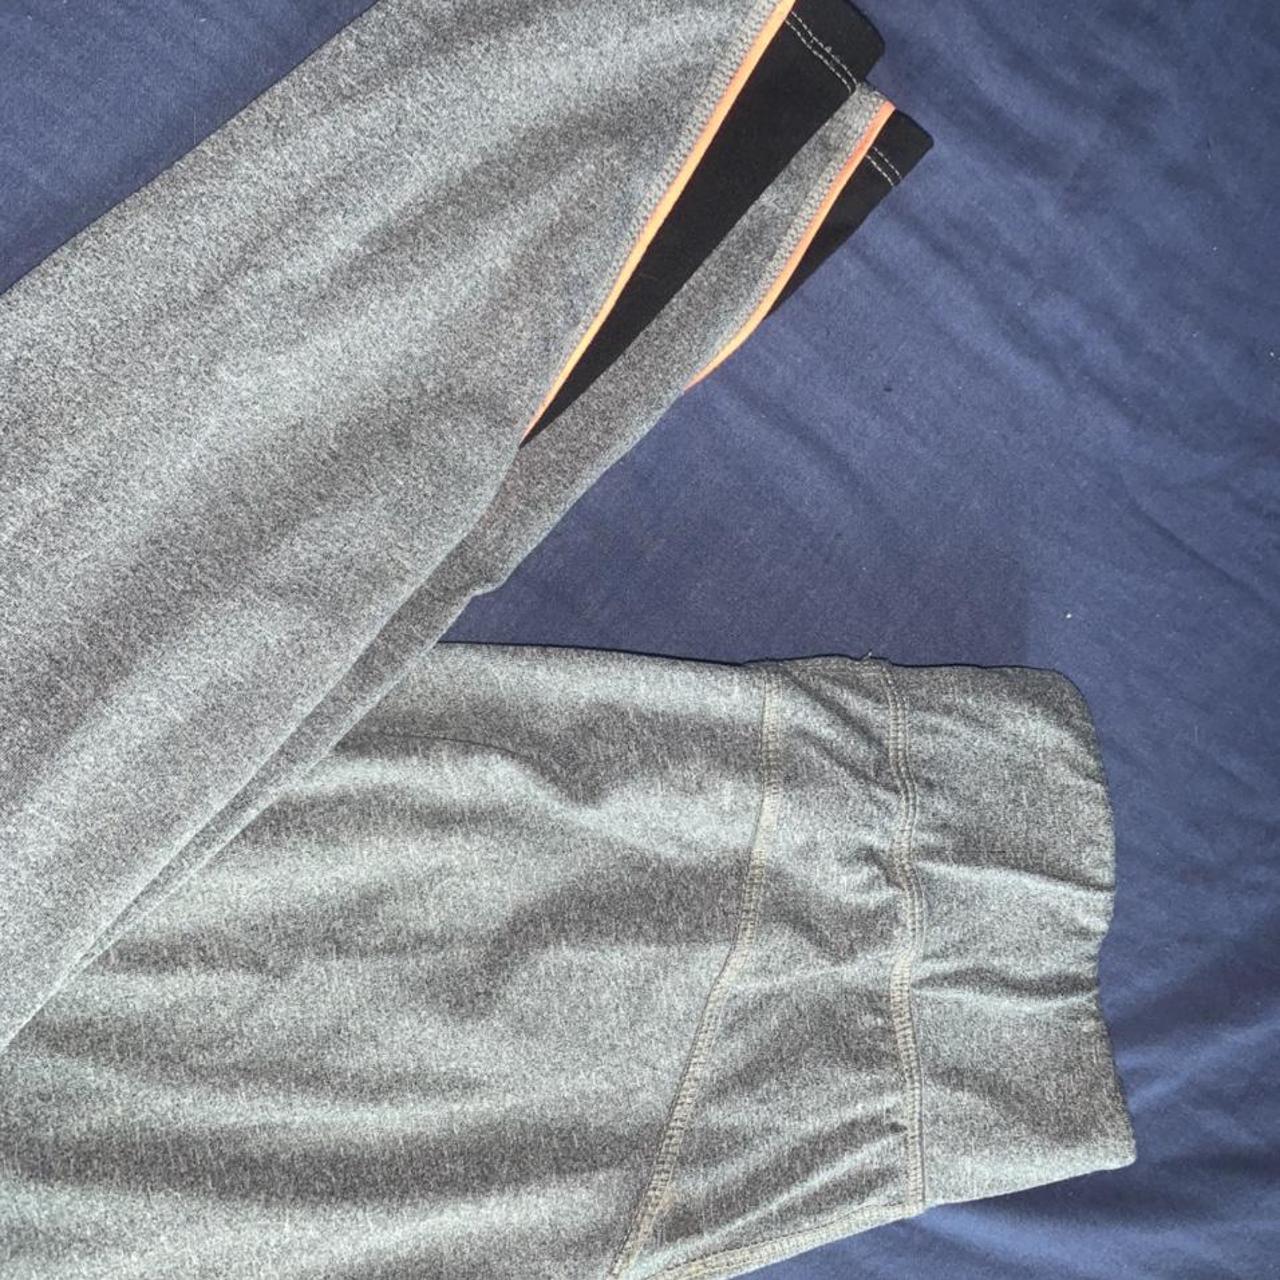 New Look grey leggings, would fit 8-10 (I’m size... - Depop